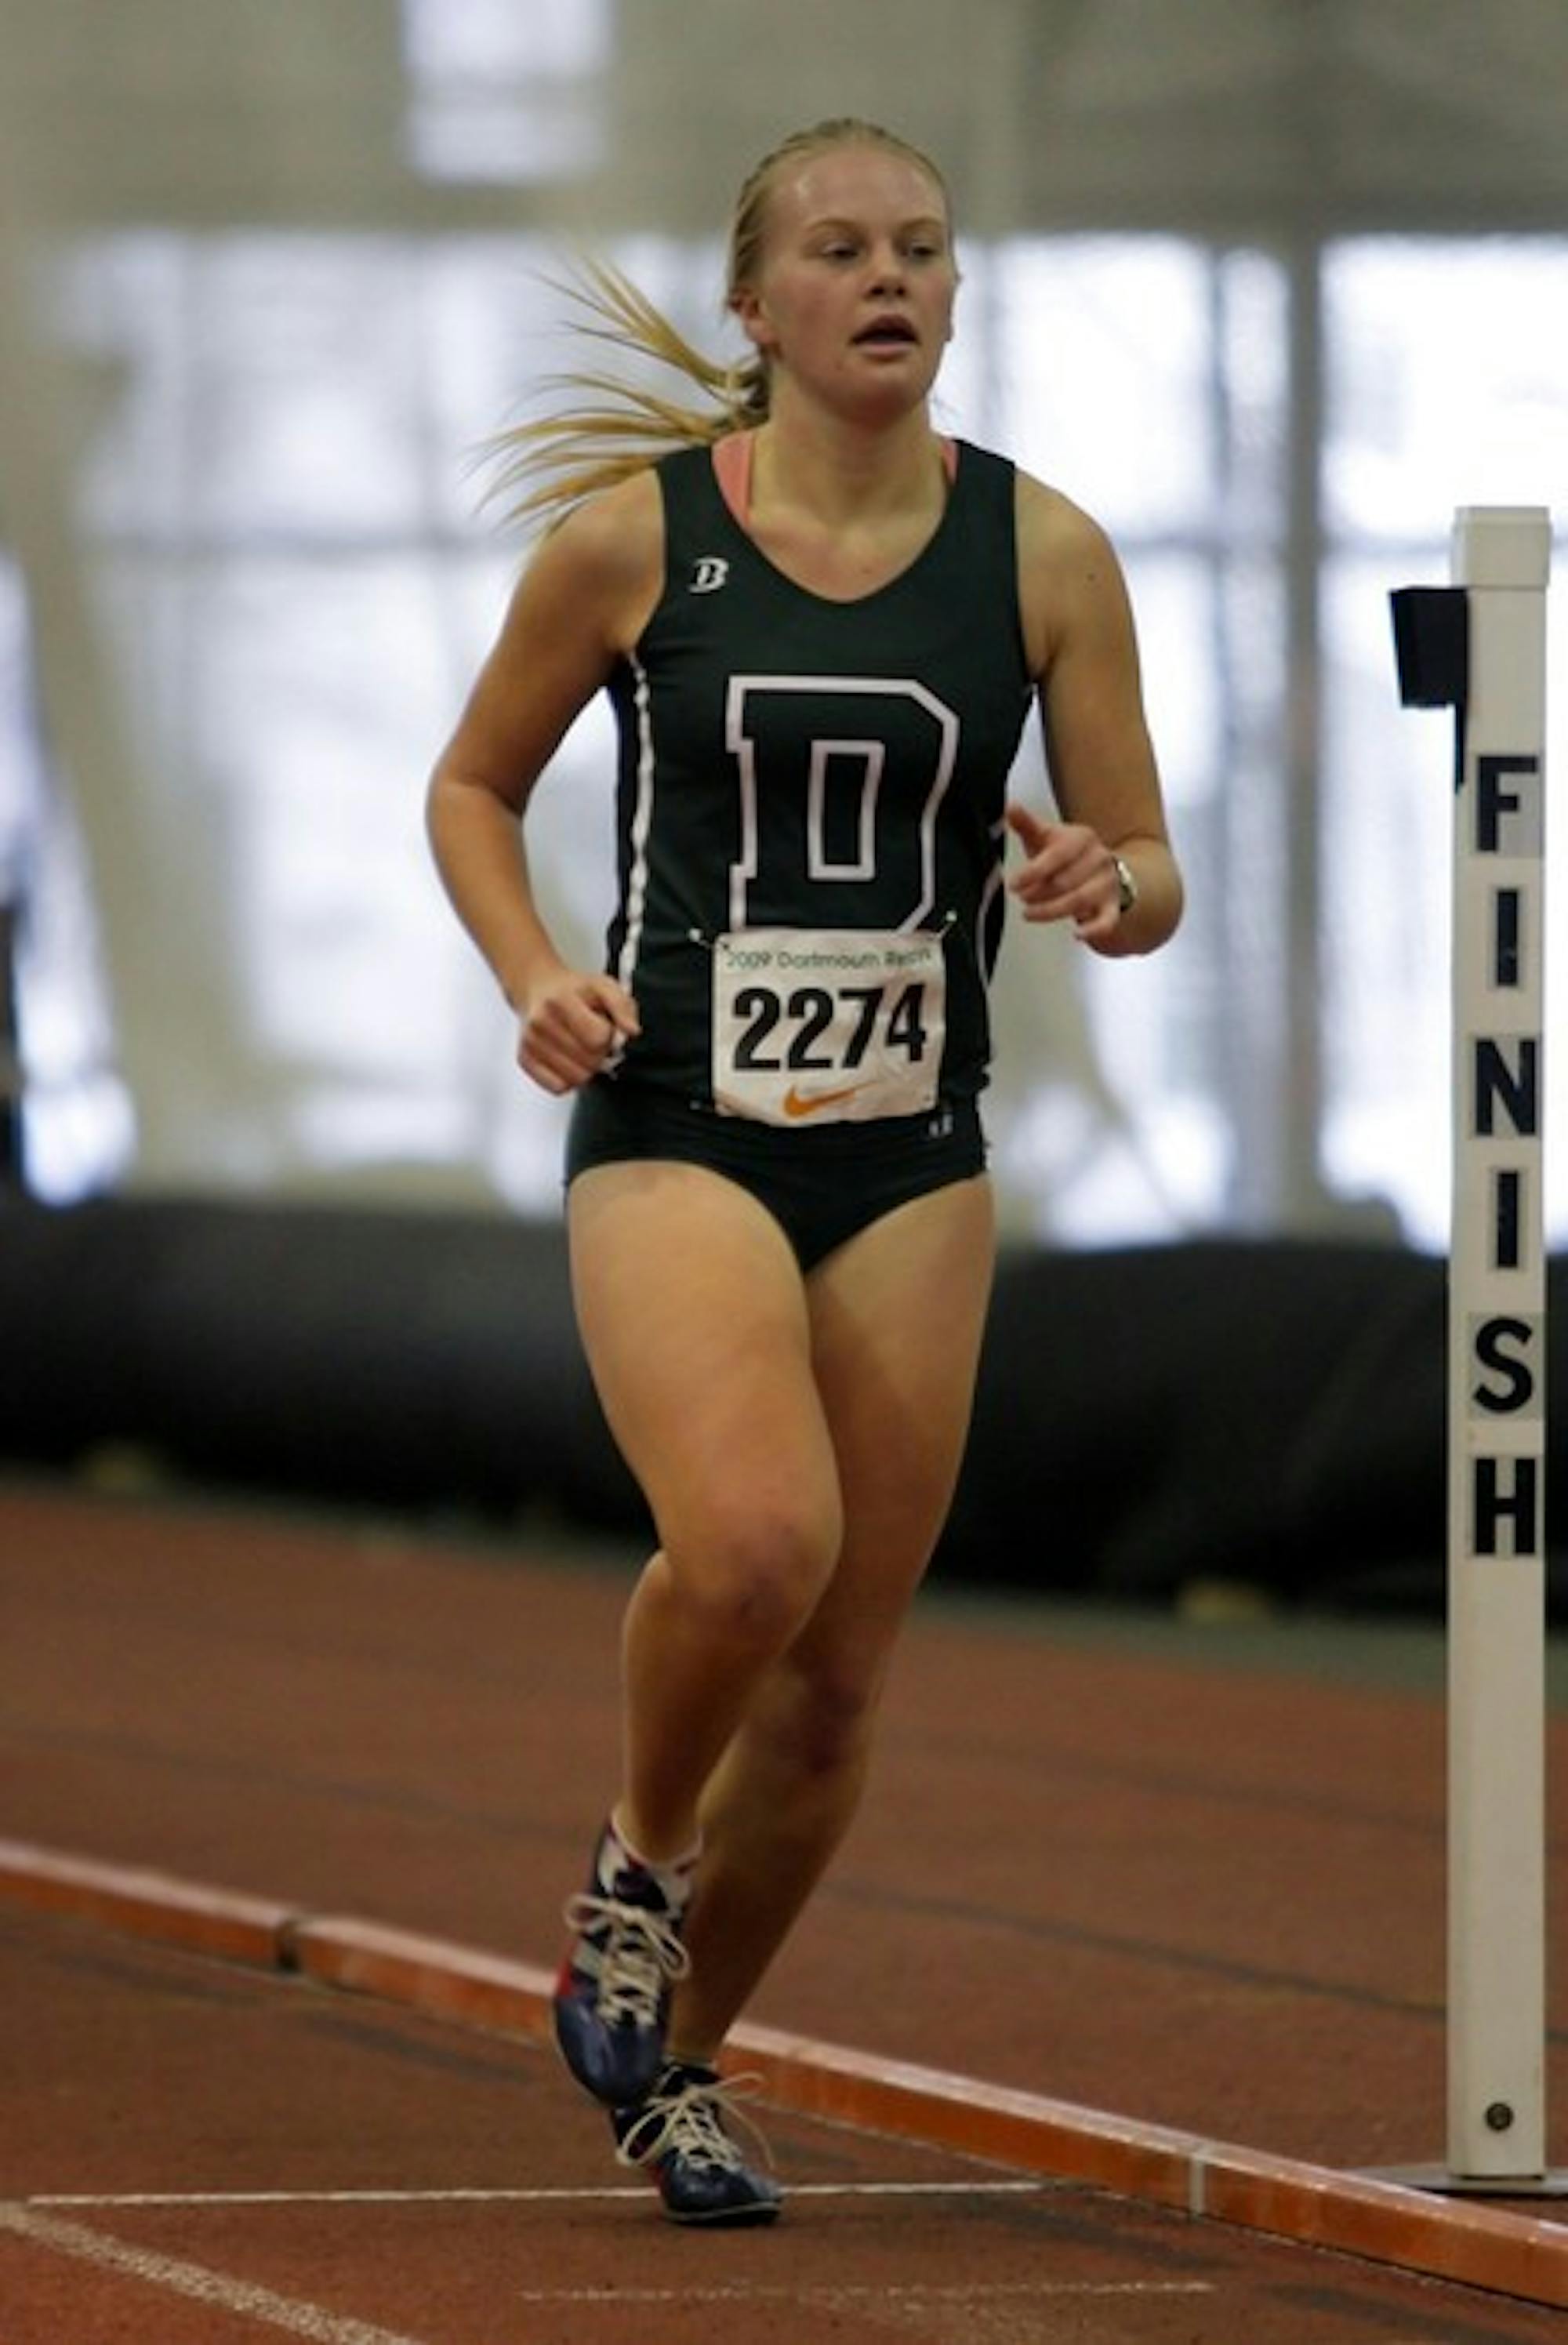 The Dartmouth women's track and field team took first place in the Brown Invitational, edging out Brown by less than three points.